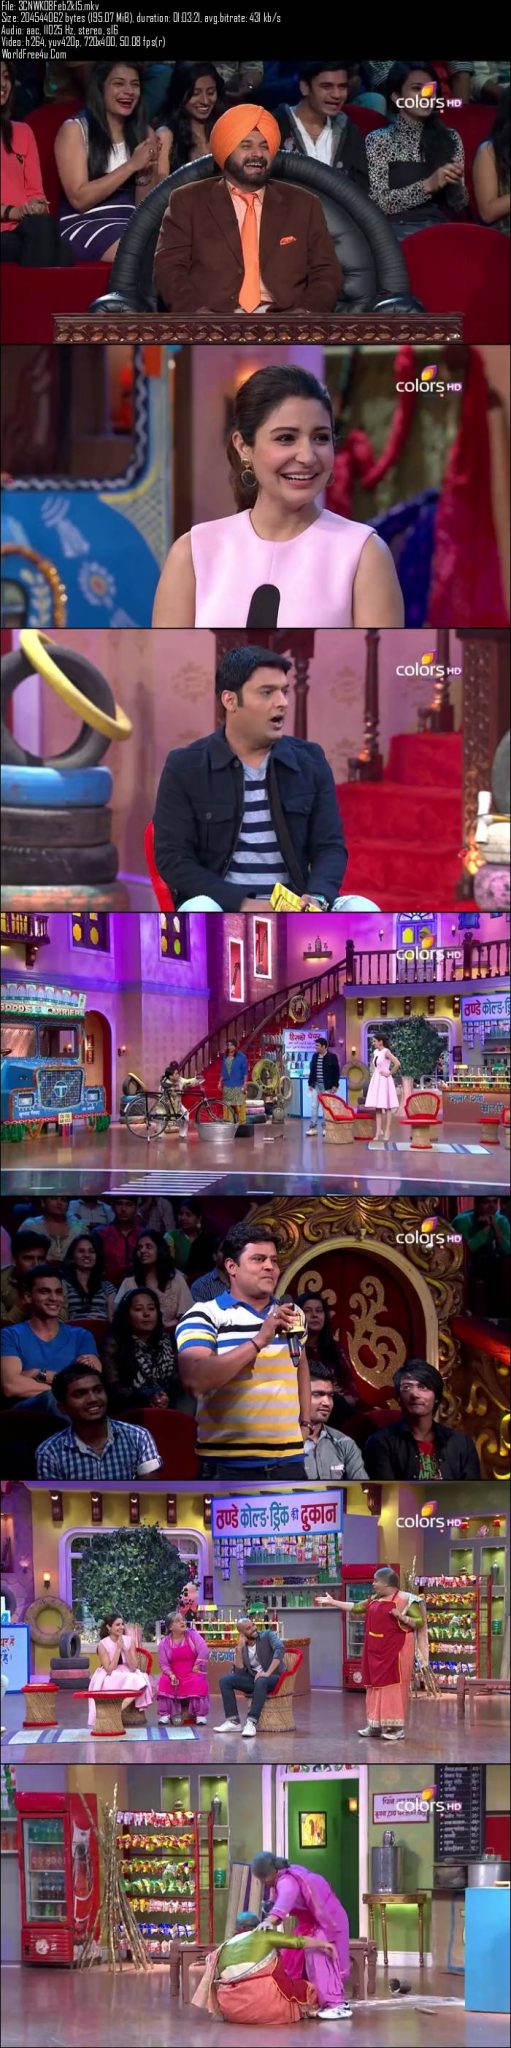 Comedy Nights With Kapil 8th March (2015)